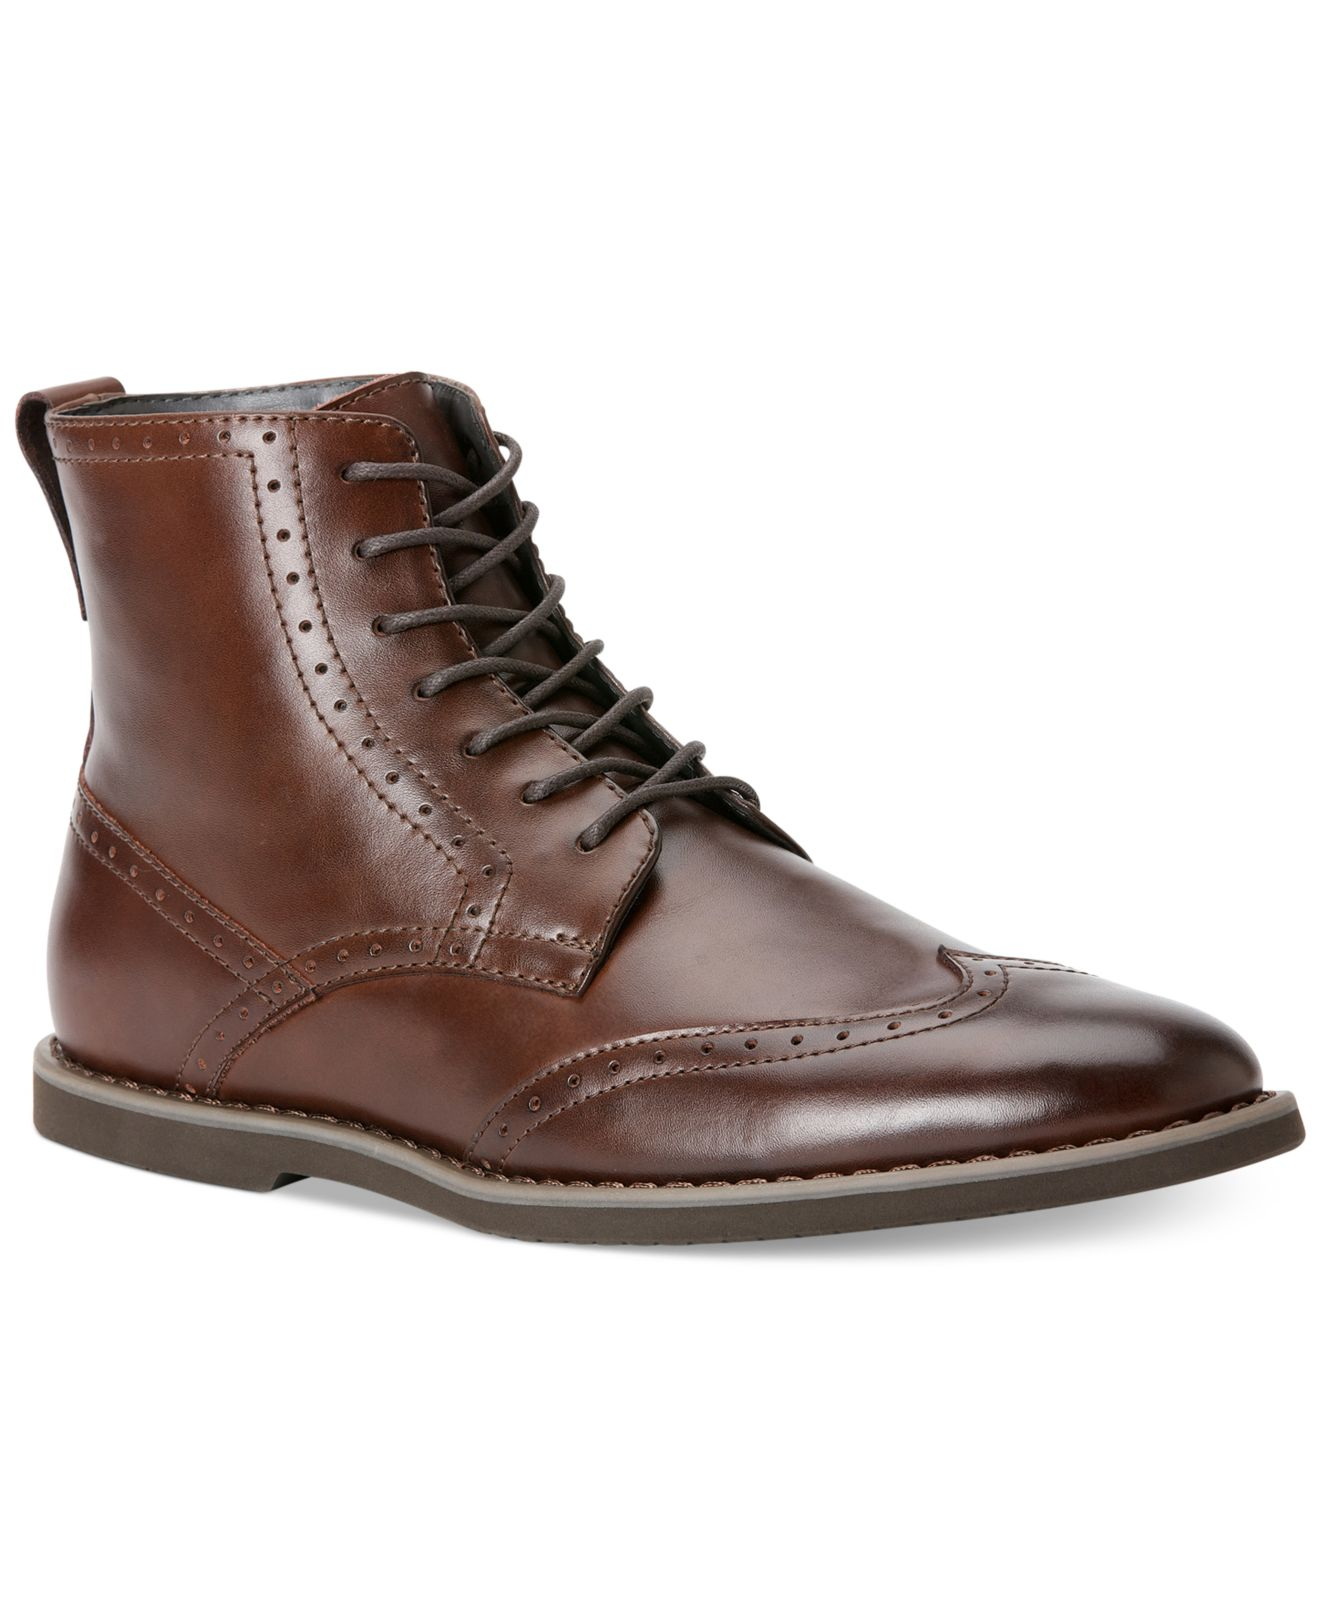 Calvin Klein Fields Wing-tip Boots in Brown Leather (Brown) for Men - Lyst